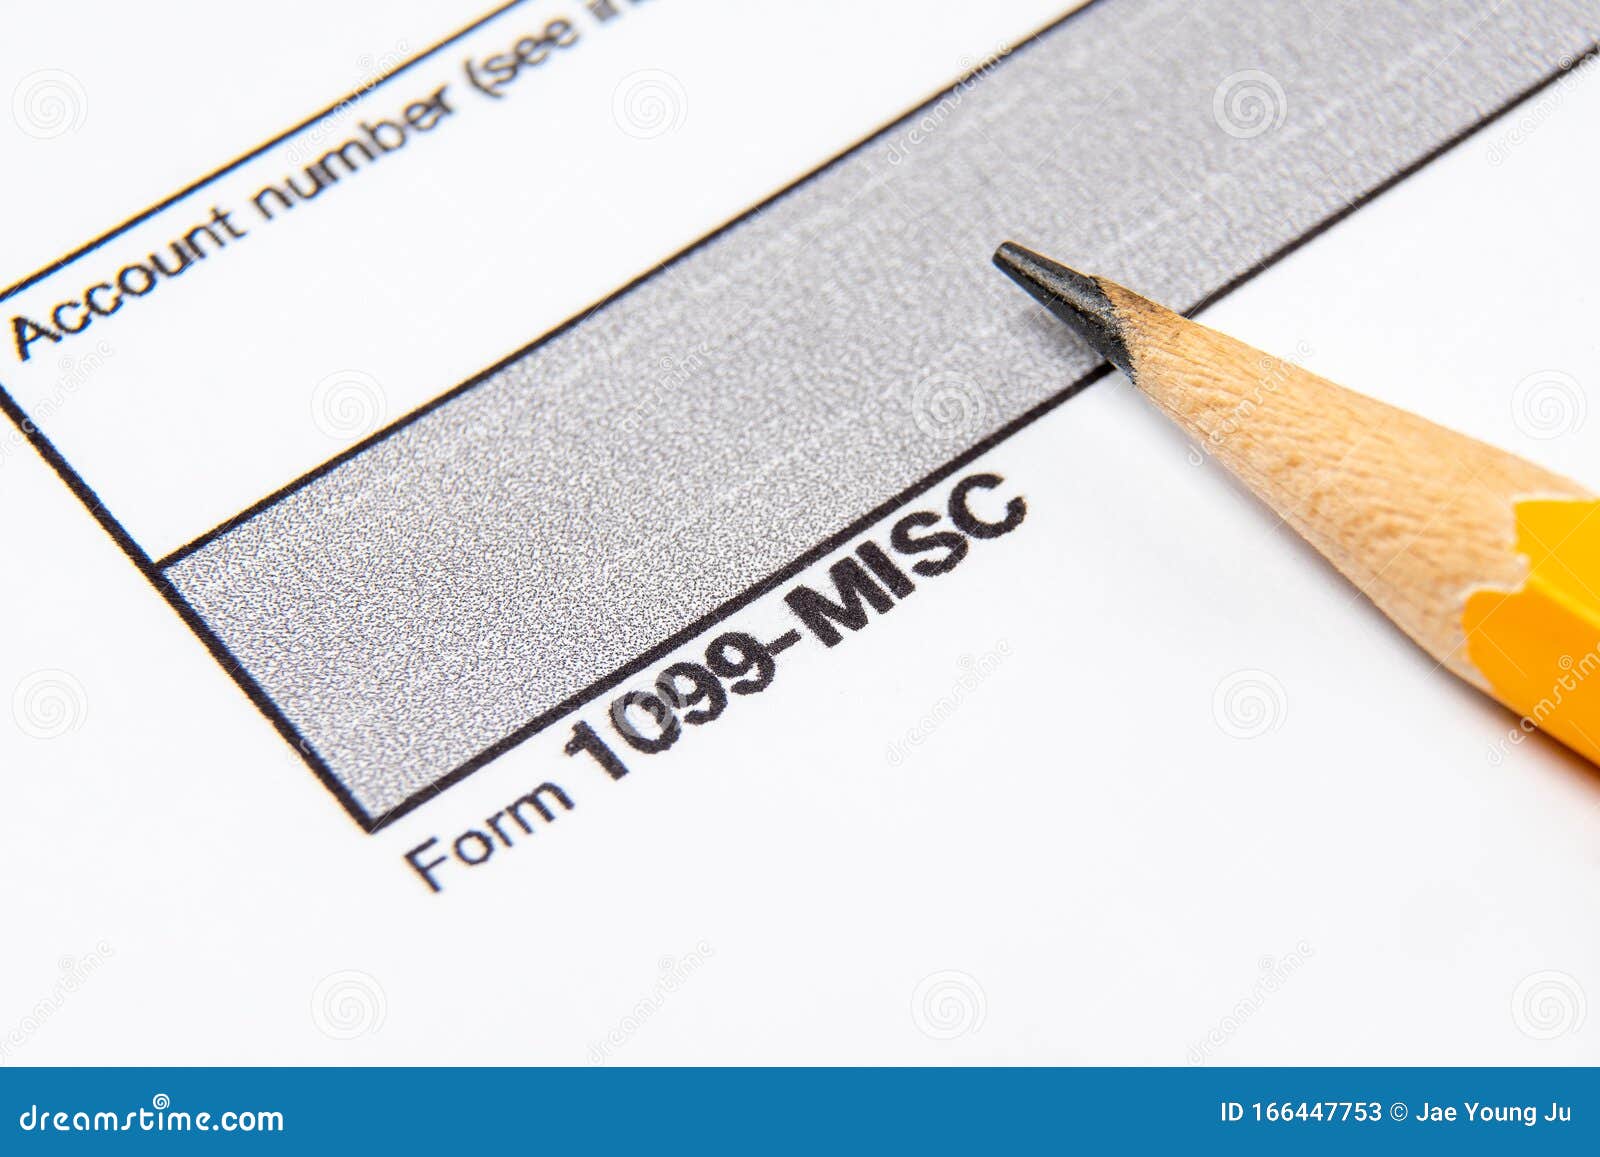 tax form 1099-misc on a white background.